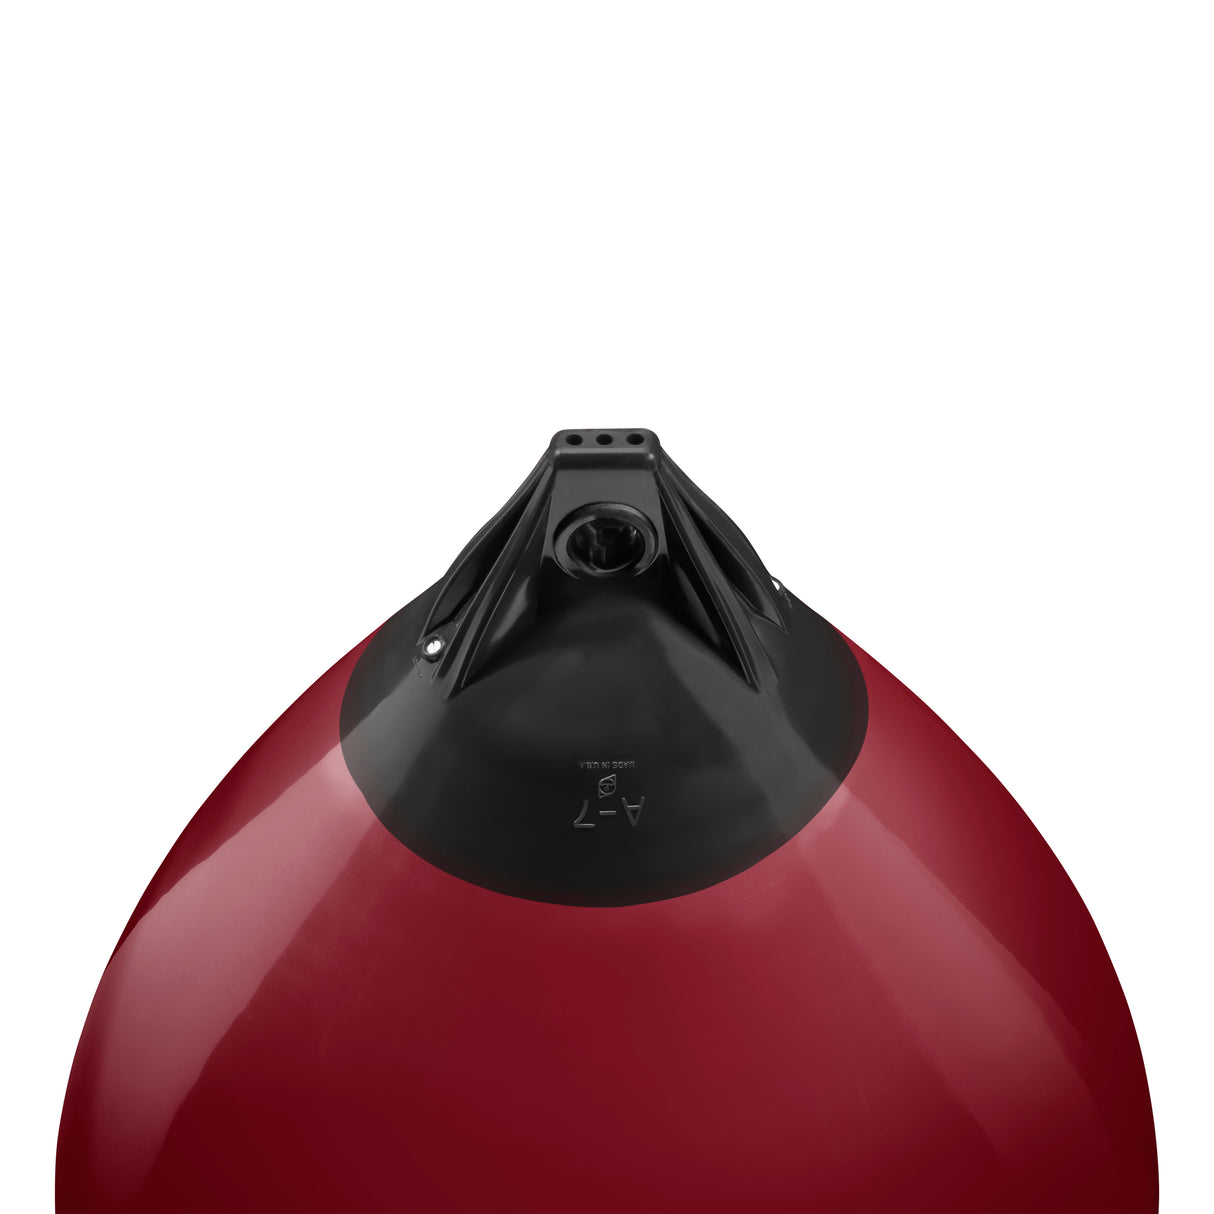 Burgundy buoy with Black-Top, Polyform A-7 angled shot